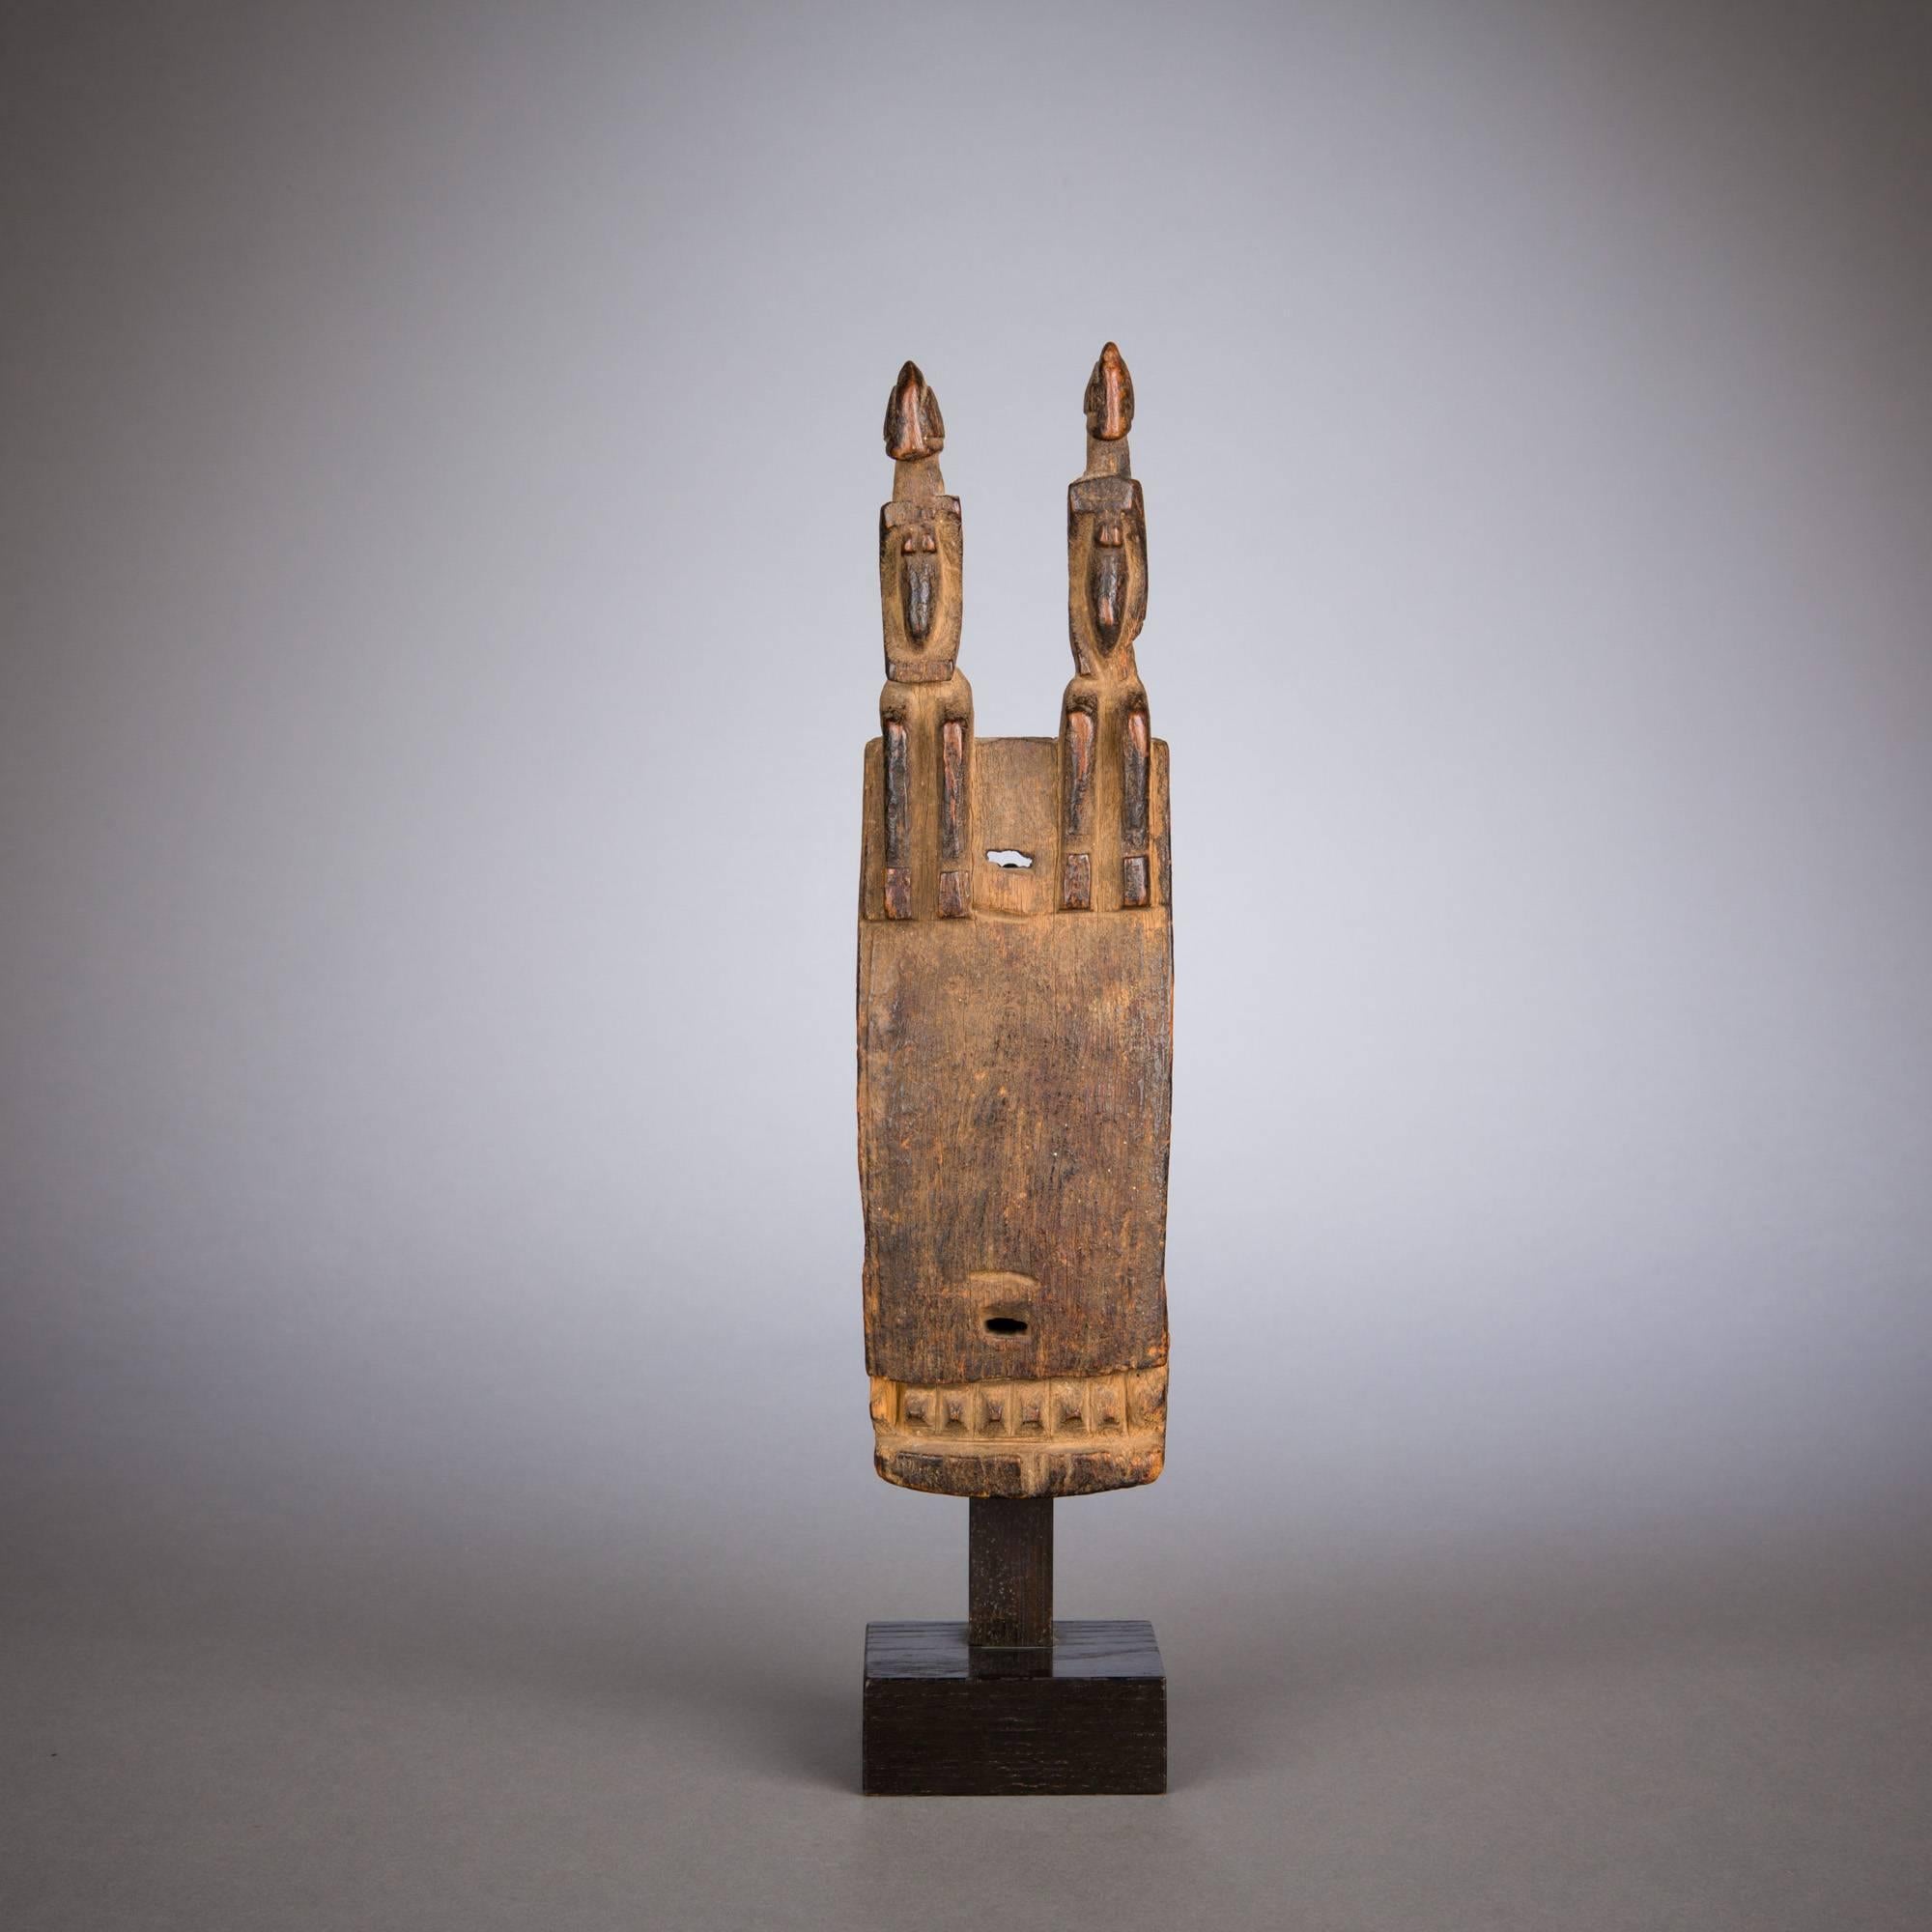 A fine Dogon door lock surmounted by two seated figures. The angular features of the pair are emphasized by strict rectilinear shapes, echoed at the bottom of the lock's face by a strip of projecting squares.

Used to protect houses and granaries,